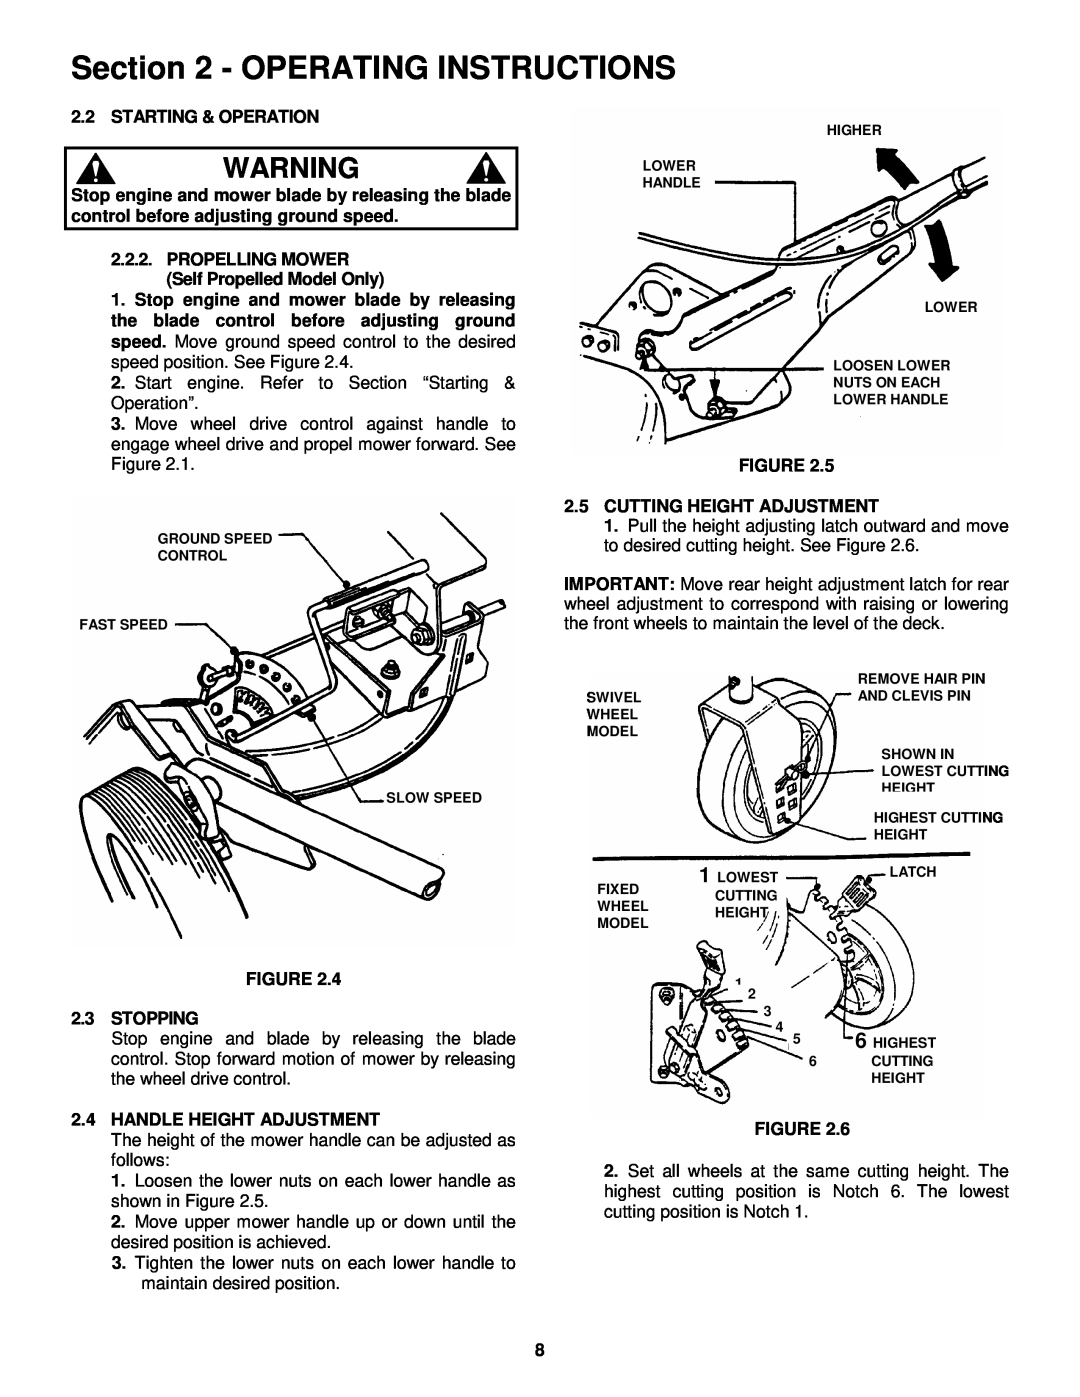 Snapper MR216017B Operating Instructions, Starting & Operation, Stopping, Handle Height Adjustment 